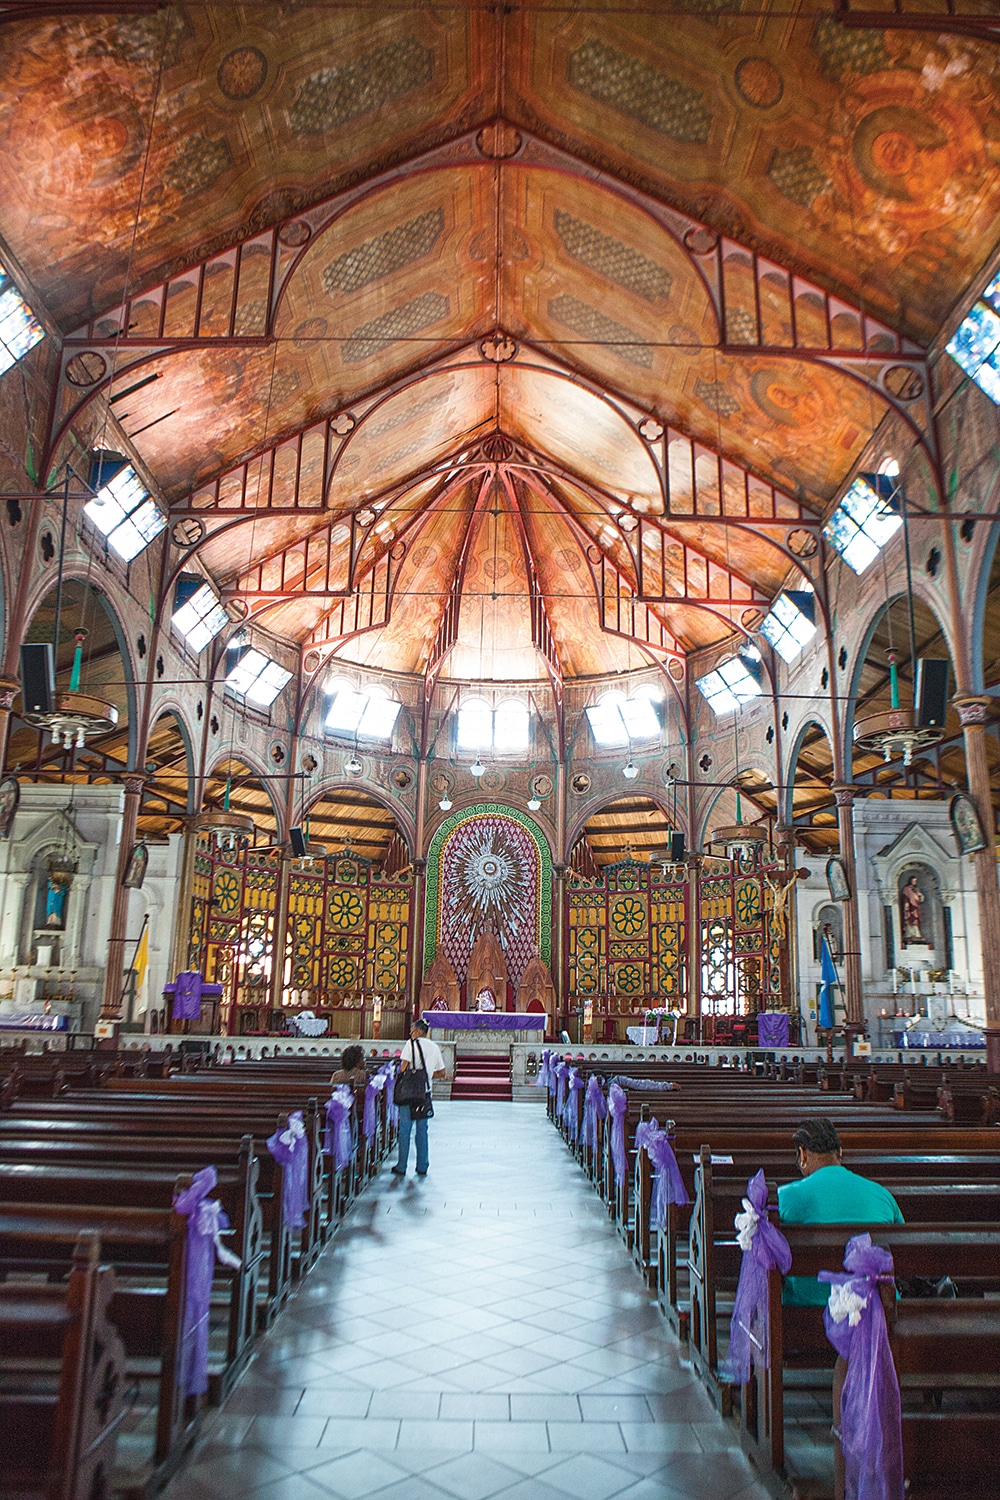 St. Lucia Resorts | Things to Do in St. Lucia: Cathedral of the Immaculate Conception